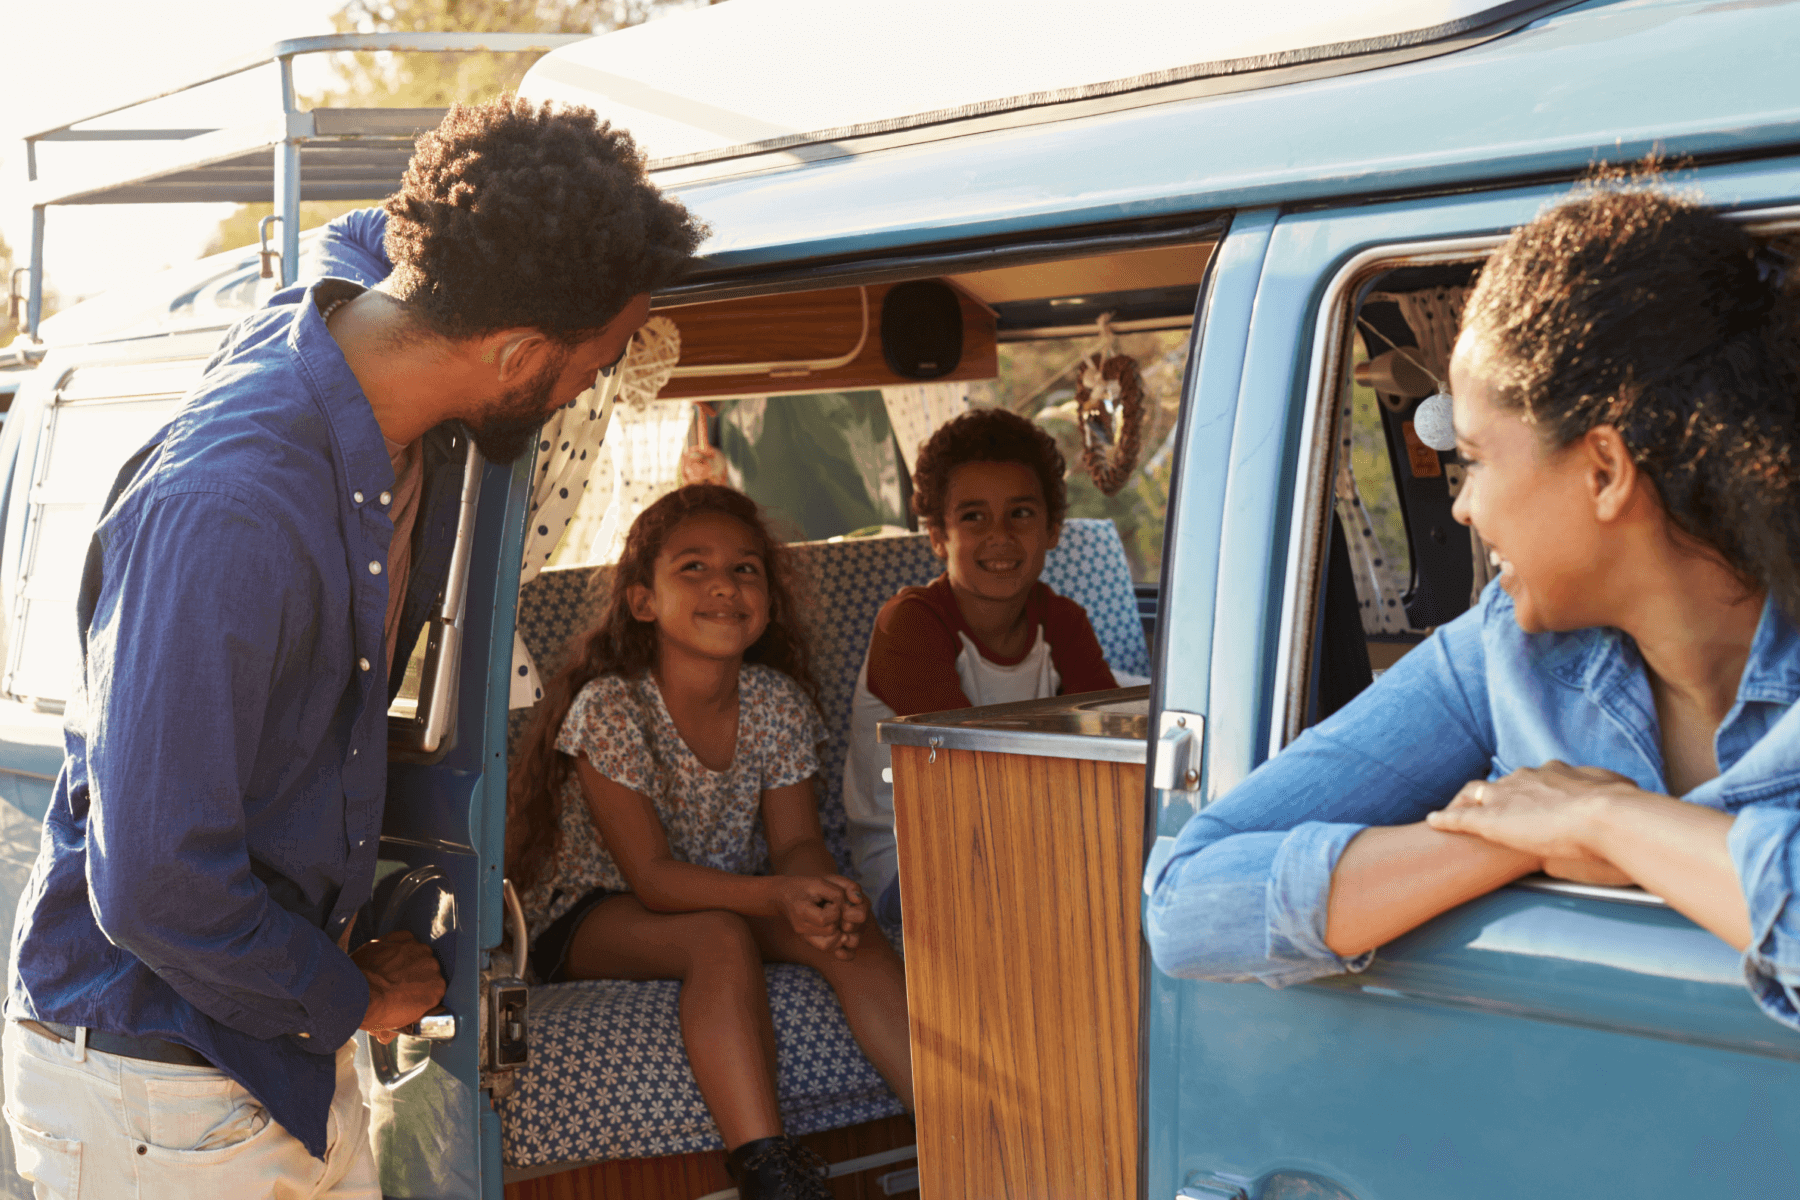 A mother and father smile at their two children in a vintage blue camper van.